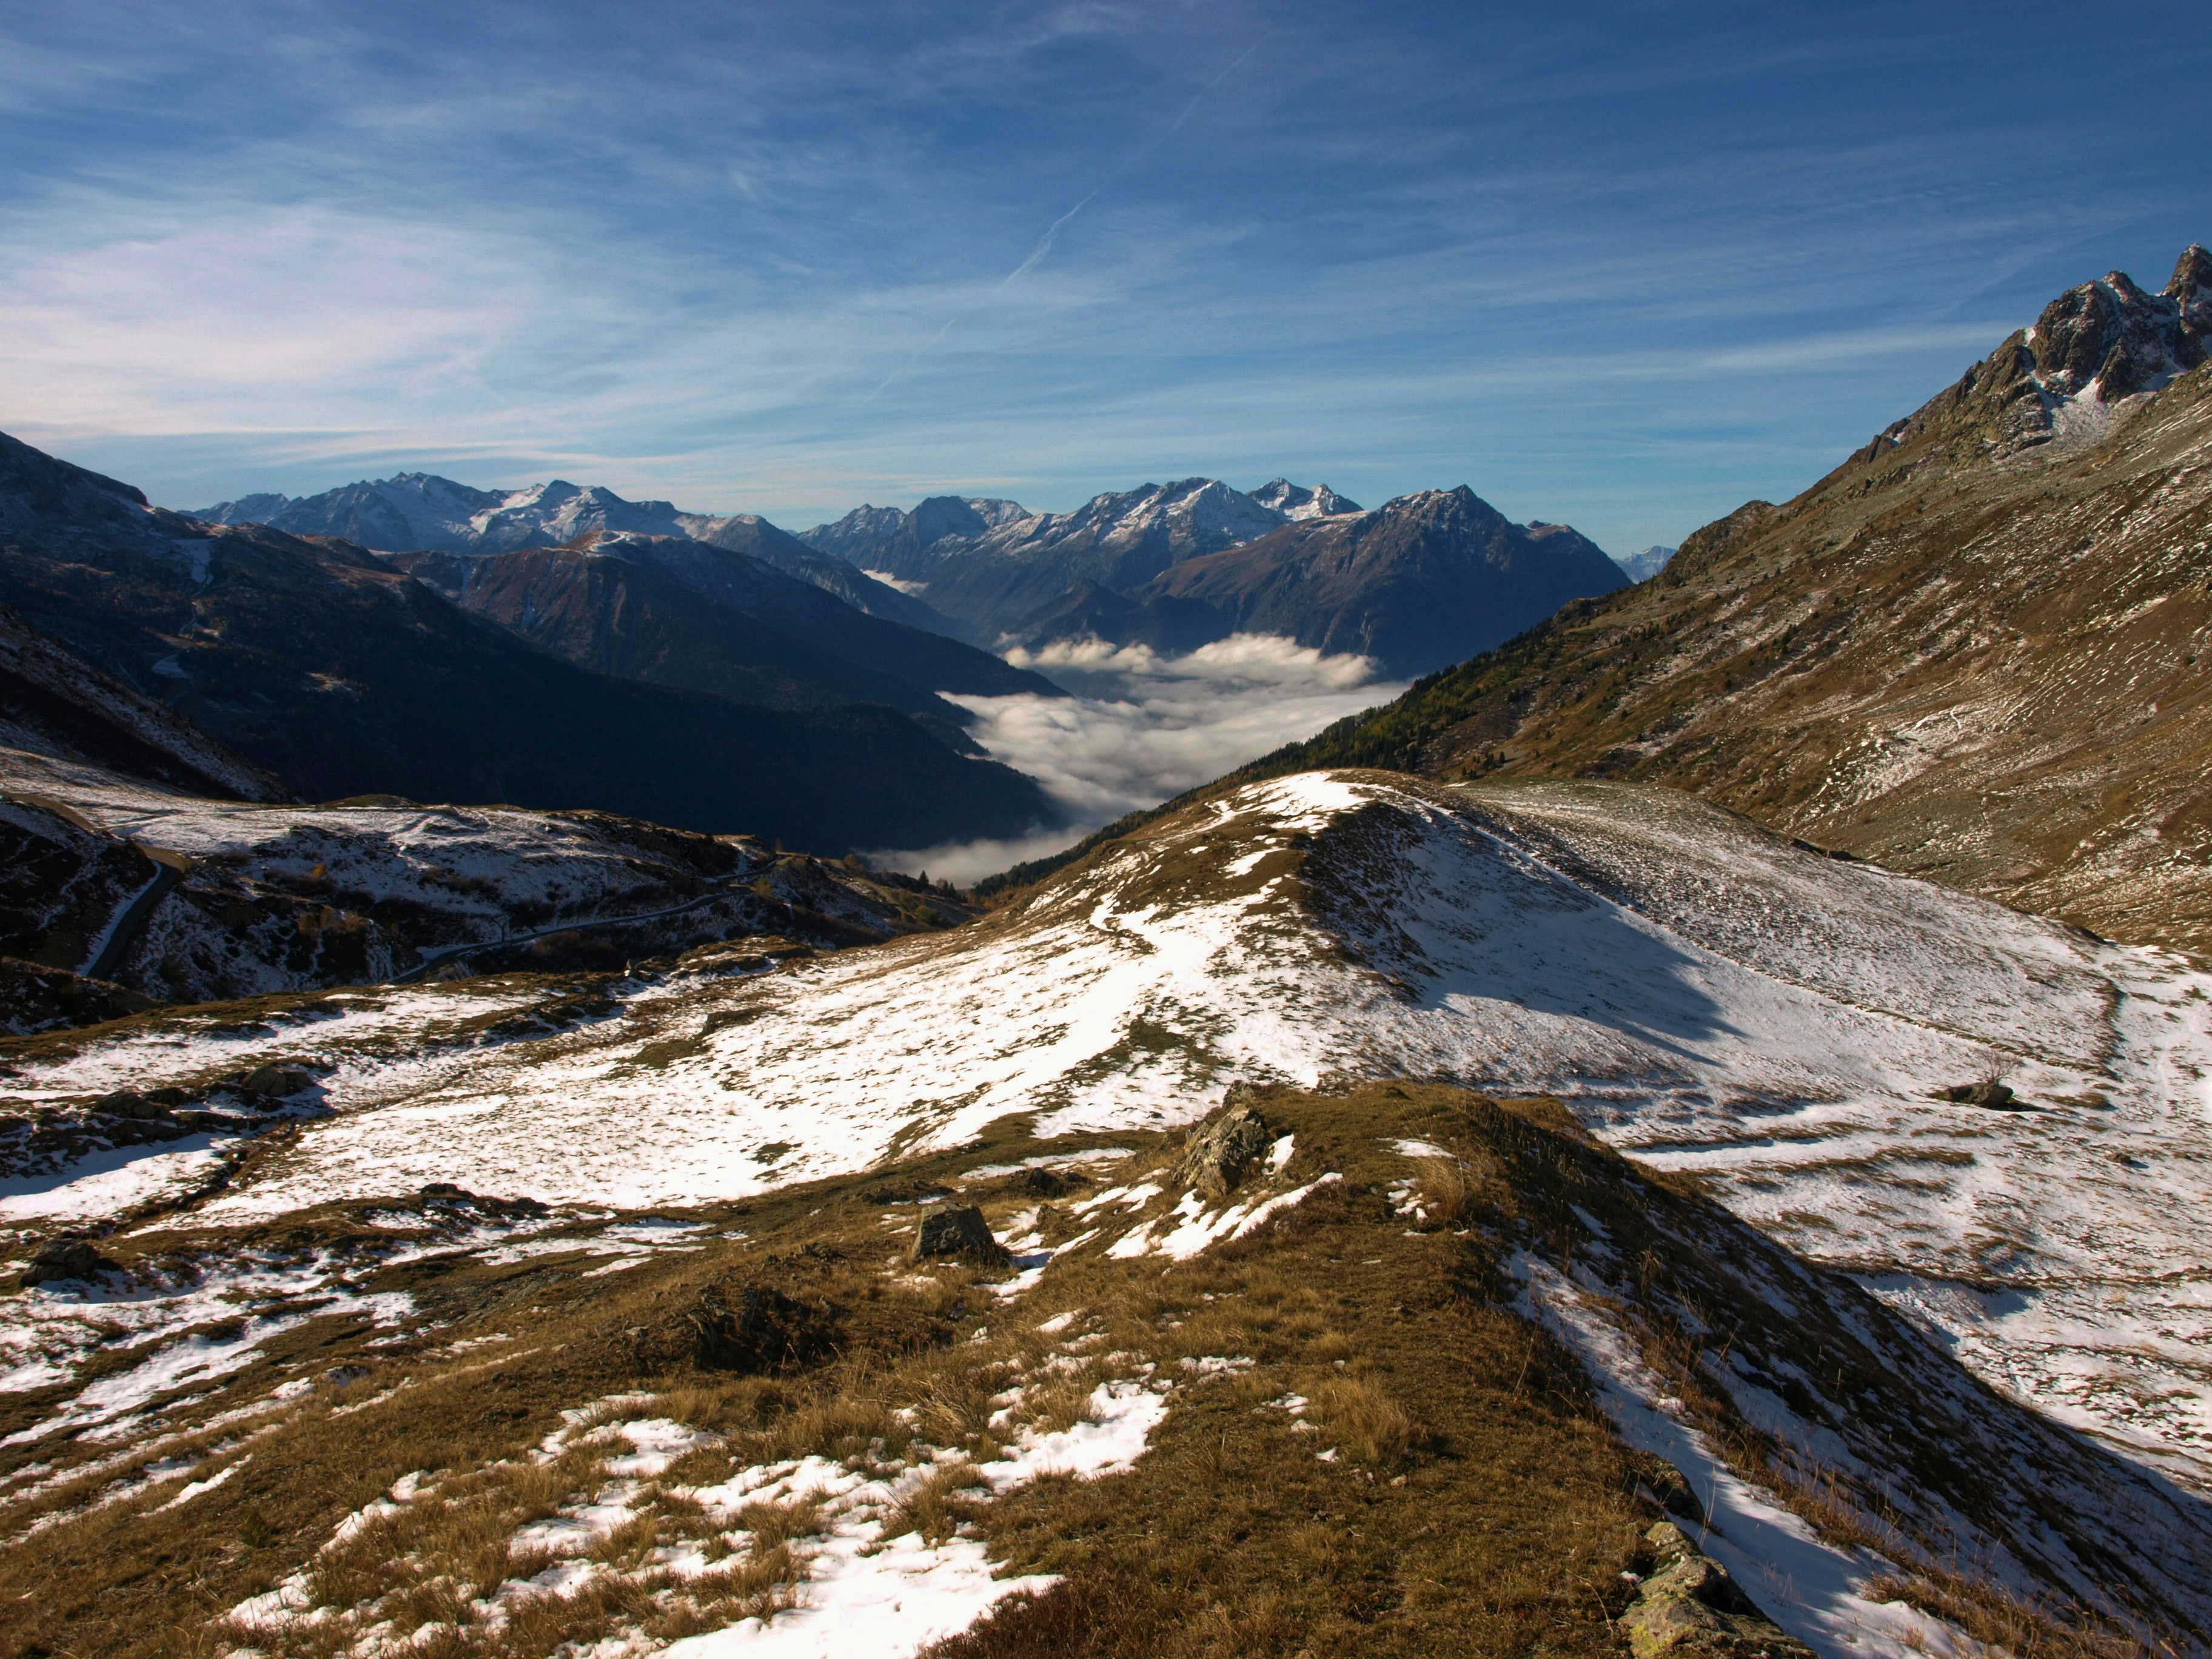 October afternoon, remains of snow at Col du Sabot.
Vaujany, France.